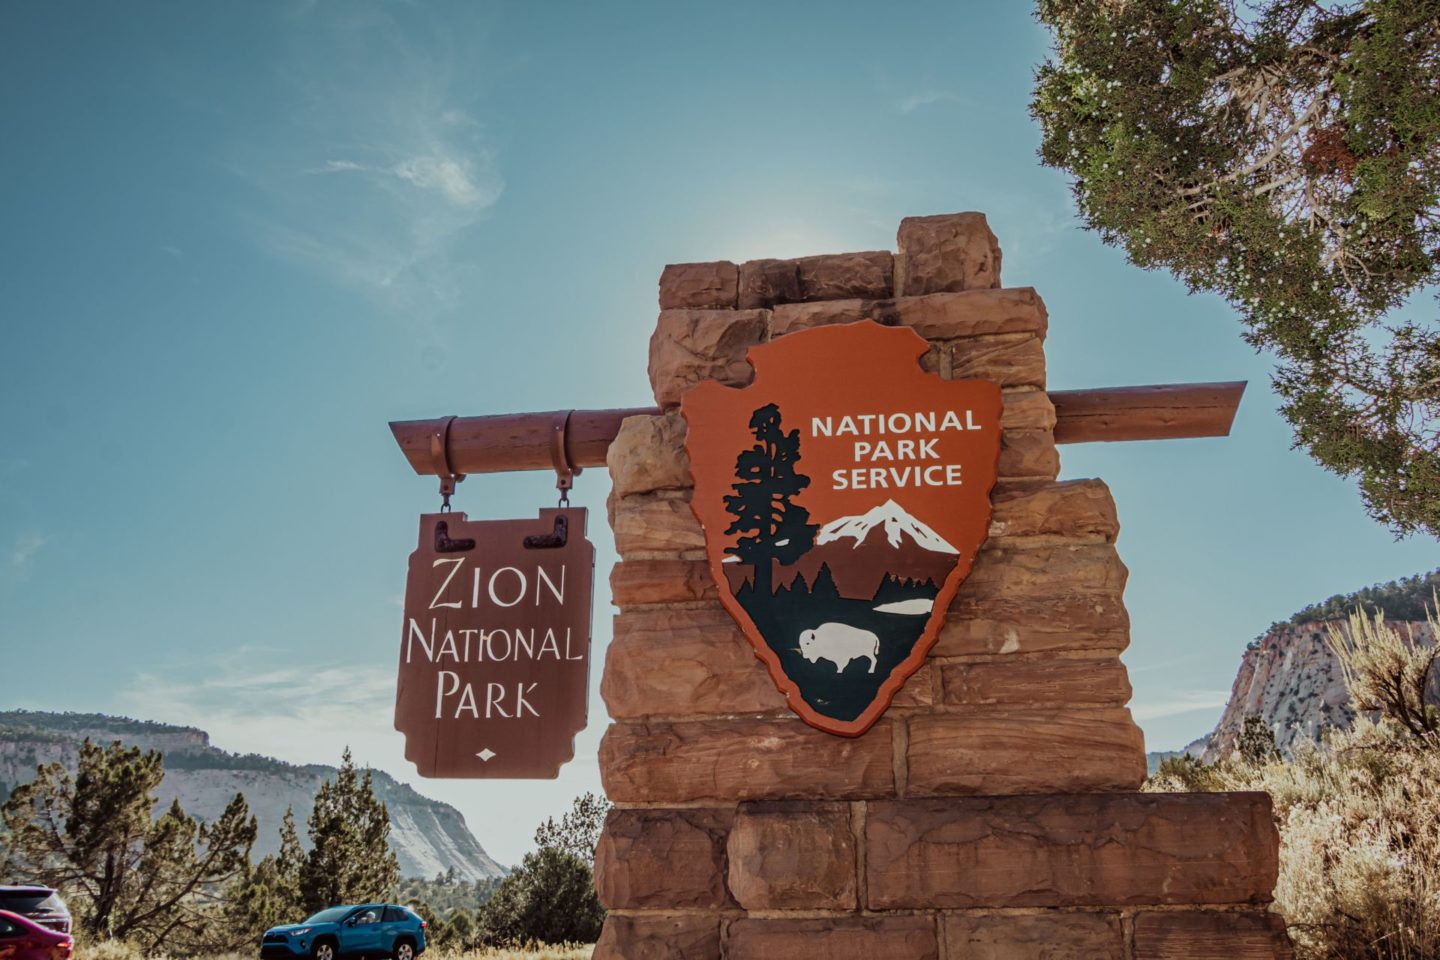 Zion National Park entrance sign by the National Park Service. Enter the park for $30 or use your America The Beautiful Pass.